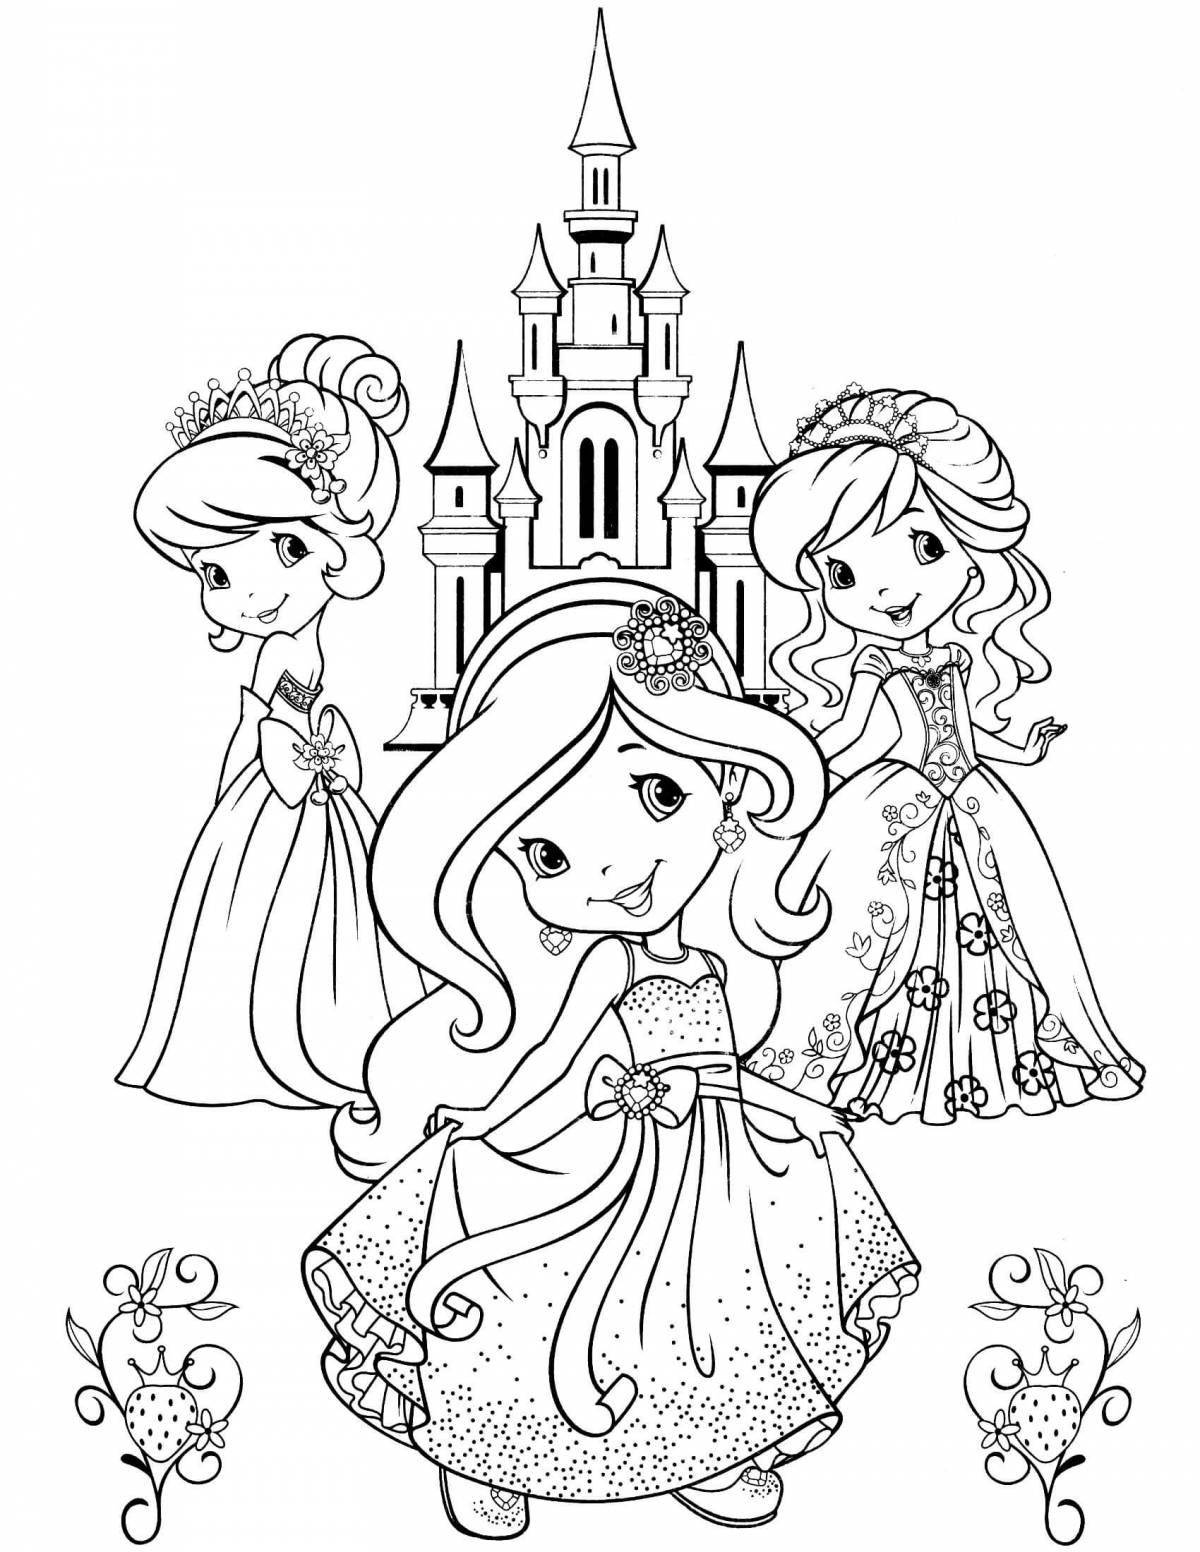 Dazzling princess coloring pictures